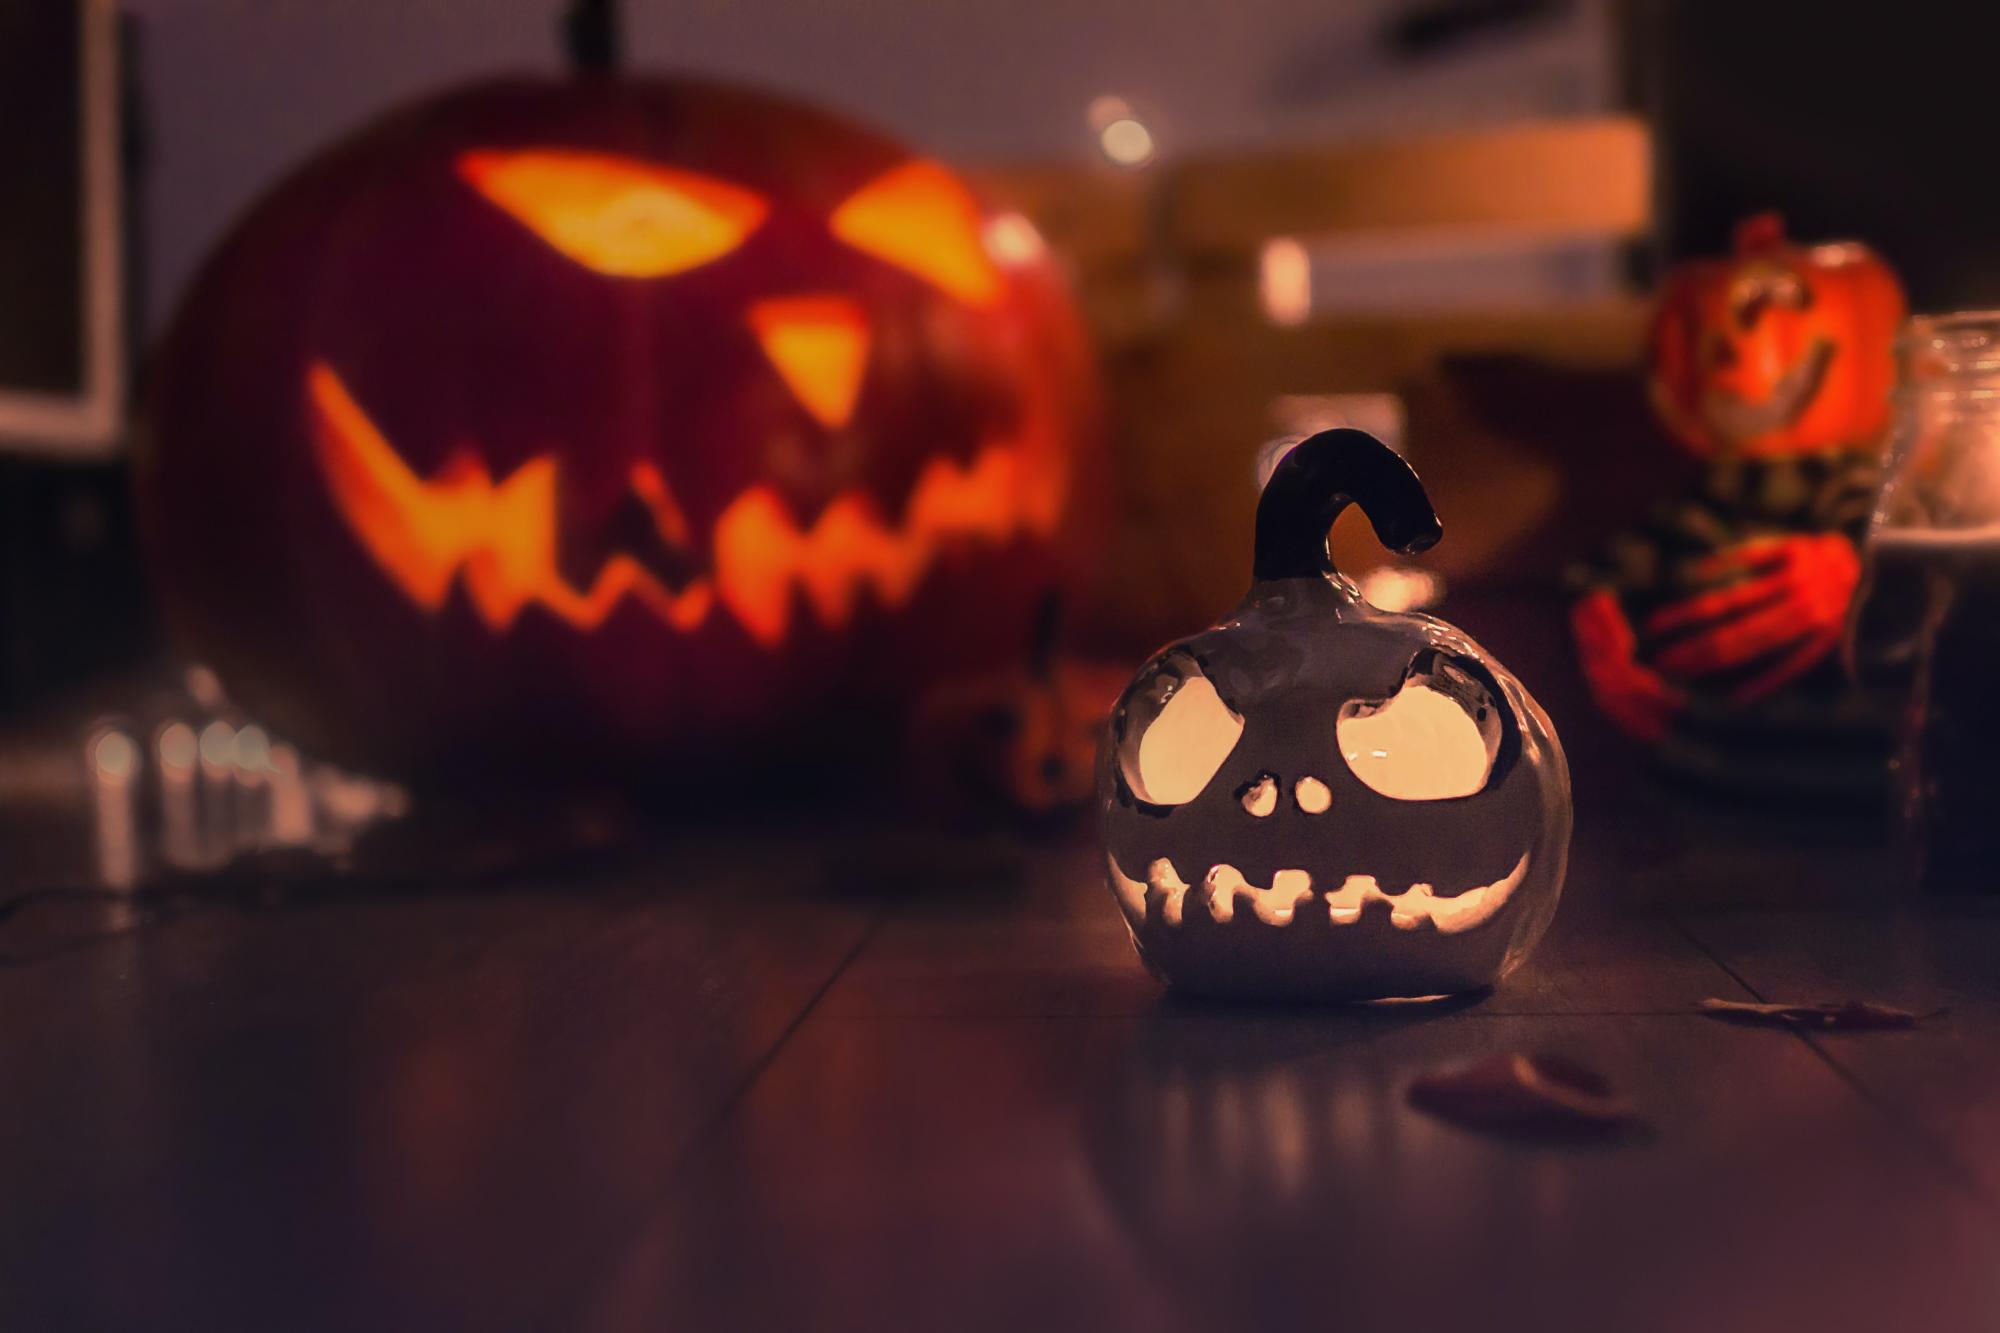 A small whitish pumpkin with a sinister face carved into it sits in the foreground of the image, with a much larger orange pumpkin with a similar face carved into it sitting in the background.